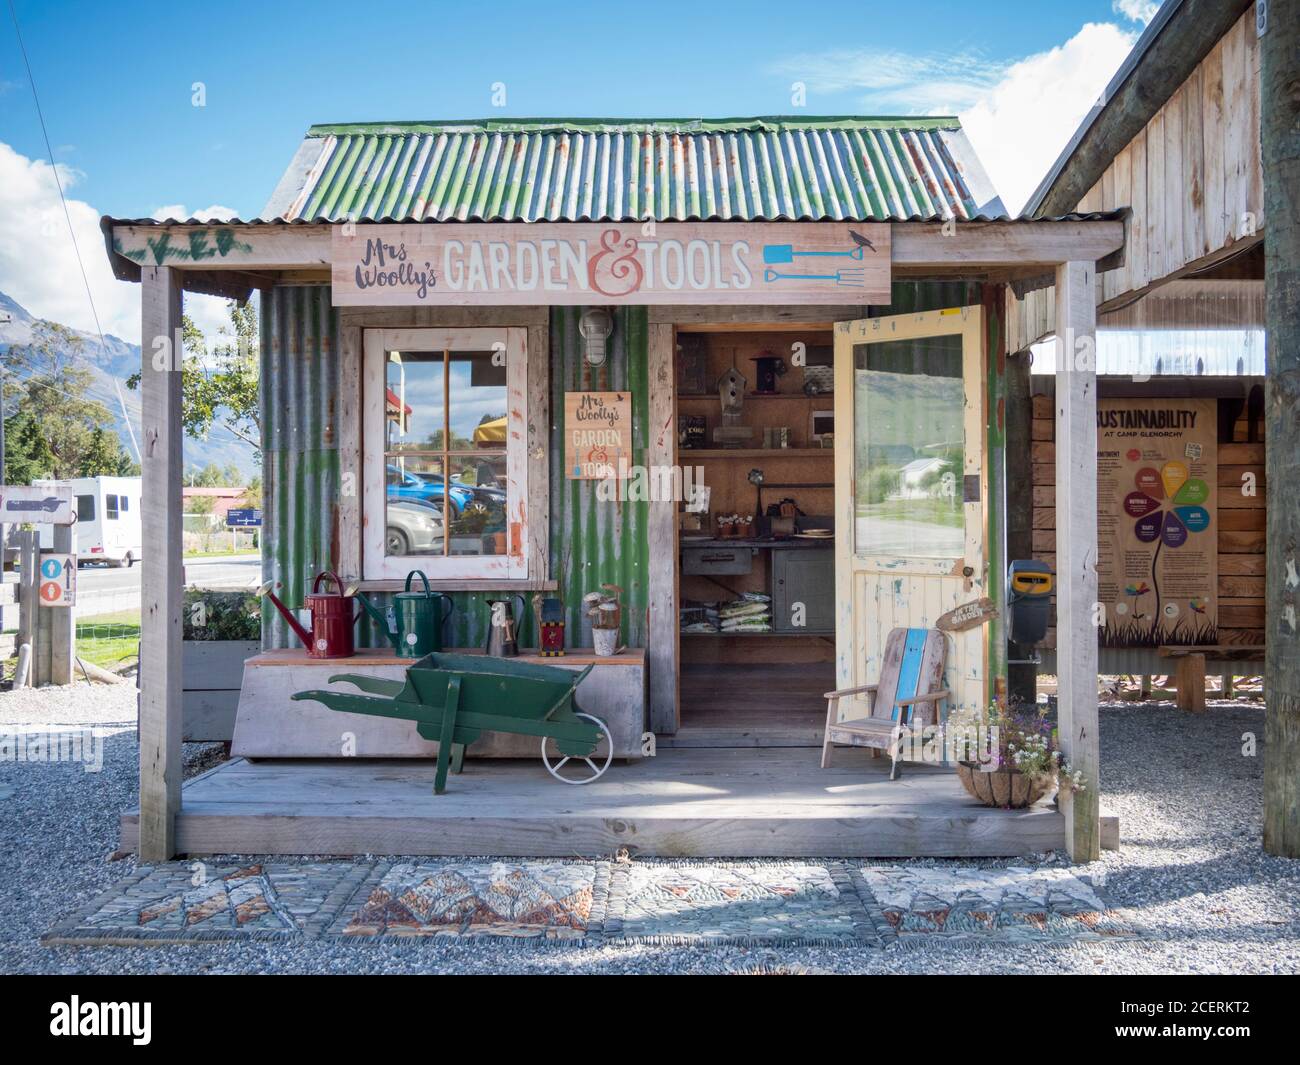 Mrs Woollys garden and tool shop in Glenorchy New Zealand in a corrugated iron shack Stock Photo